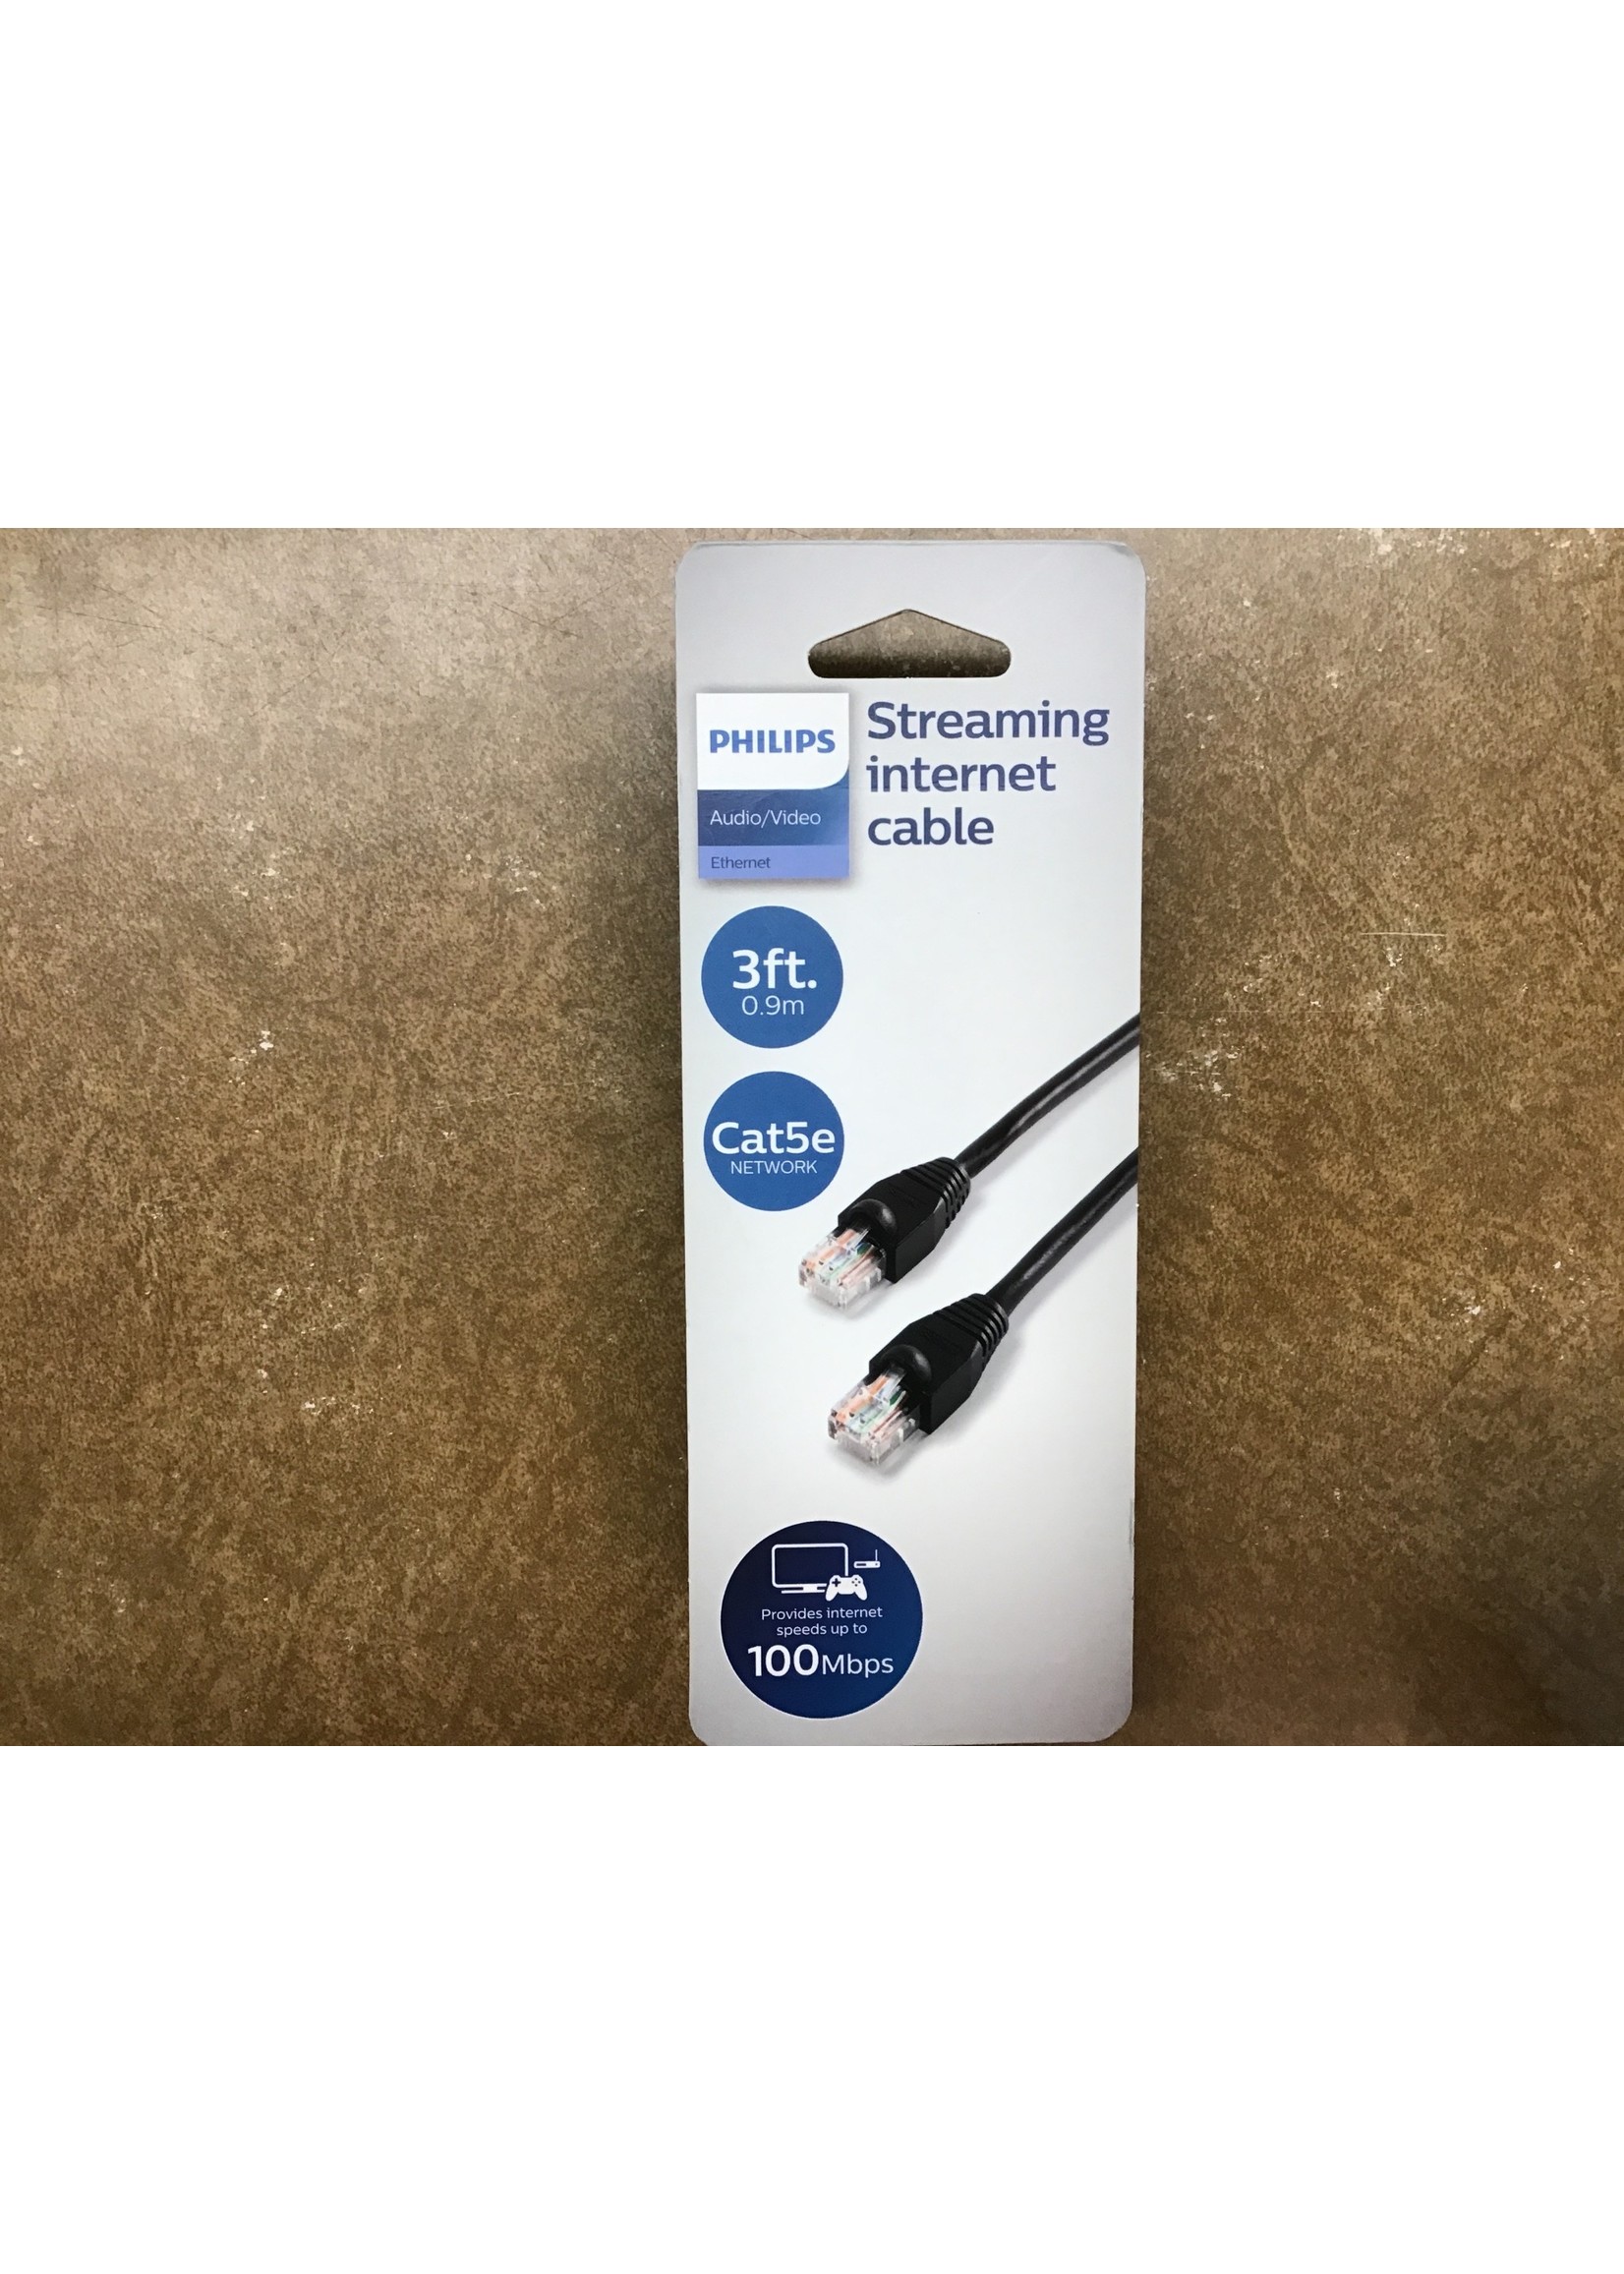 Philips Cat 5e Ethernet Networking Cable - 3ft